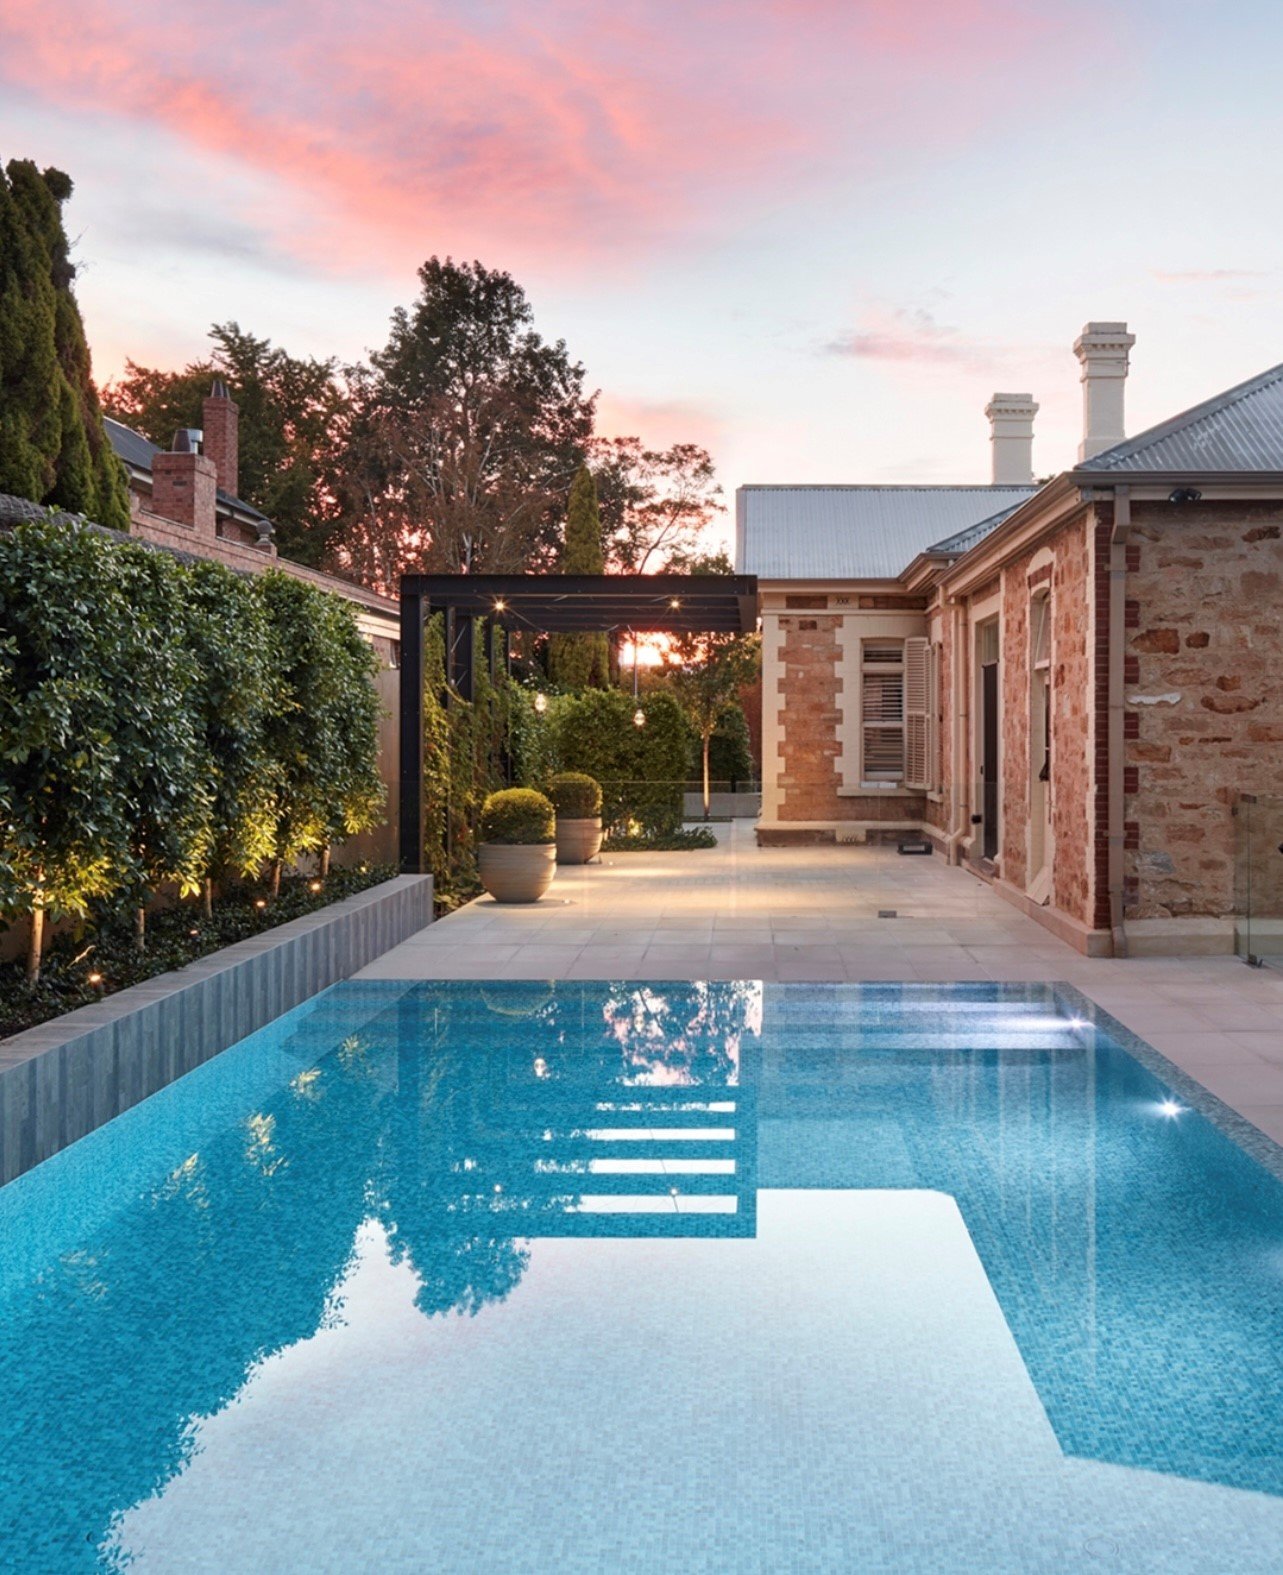 Diving into the weekend with your pool inspiration direct from @elitepoolsandlandscapes featuring our stunning Bisazza Glass Mosaics! 

Photography by @sam_noonan_photo 

#italiaceramics #tilesforalllifestyles #poolinspiration #bisazza